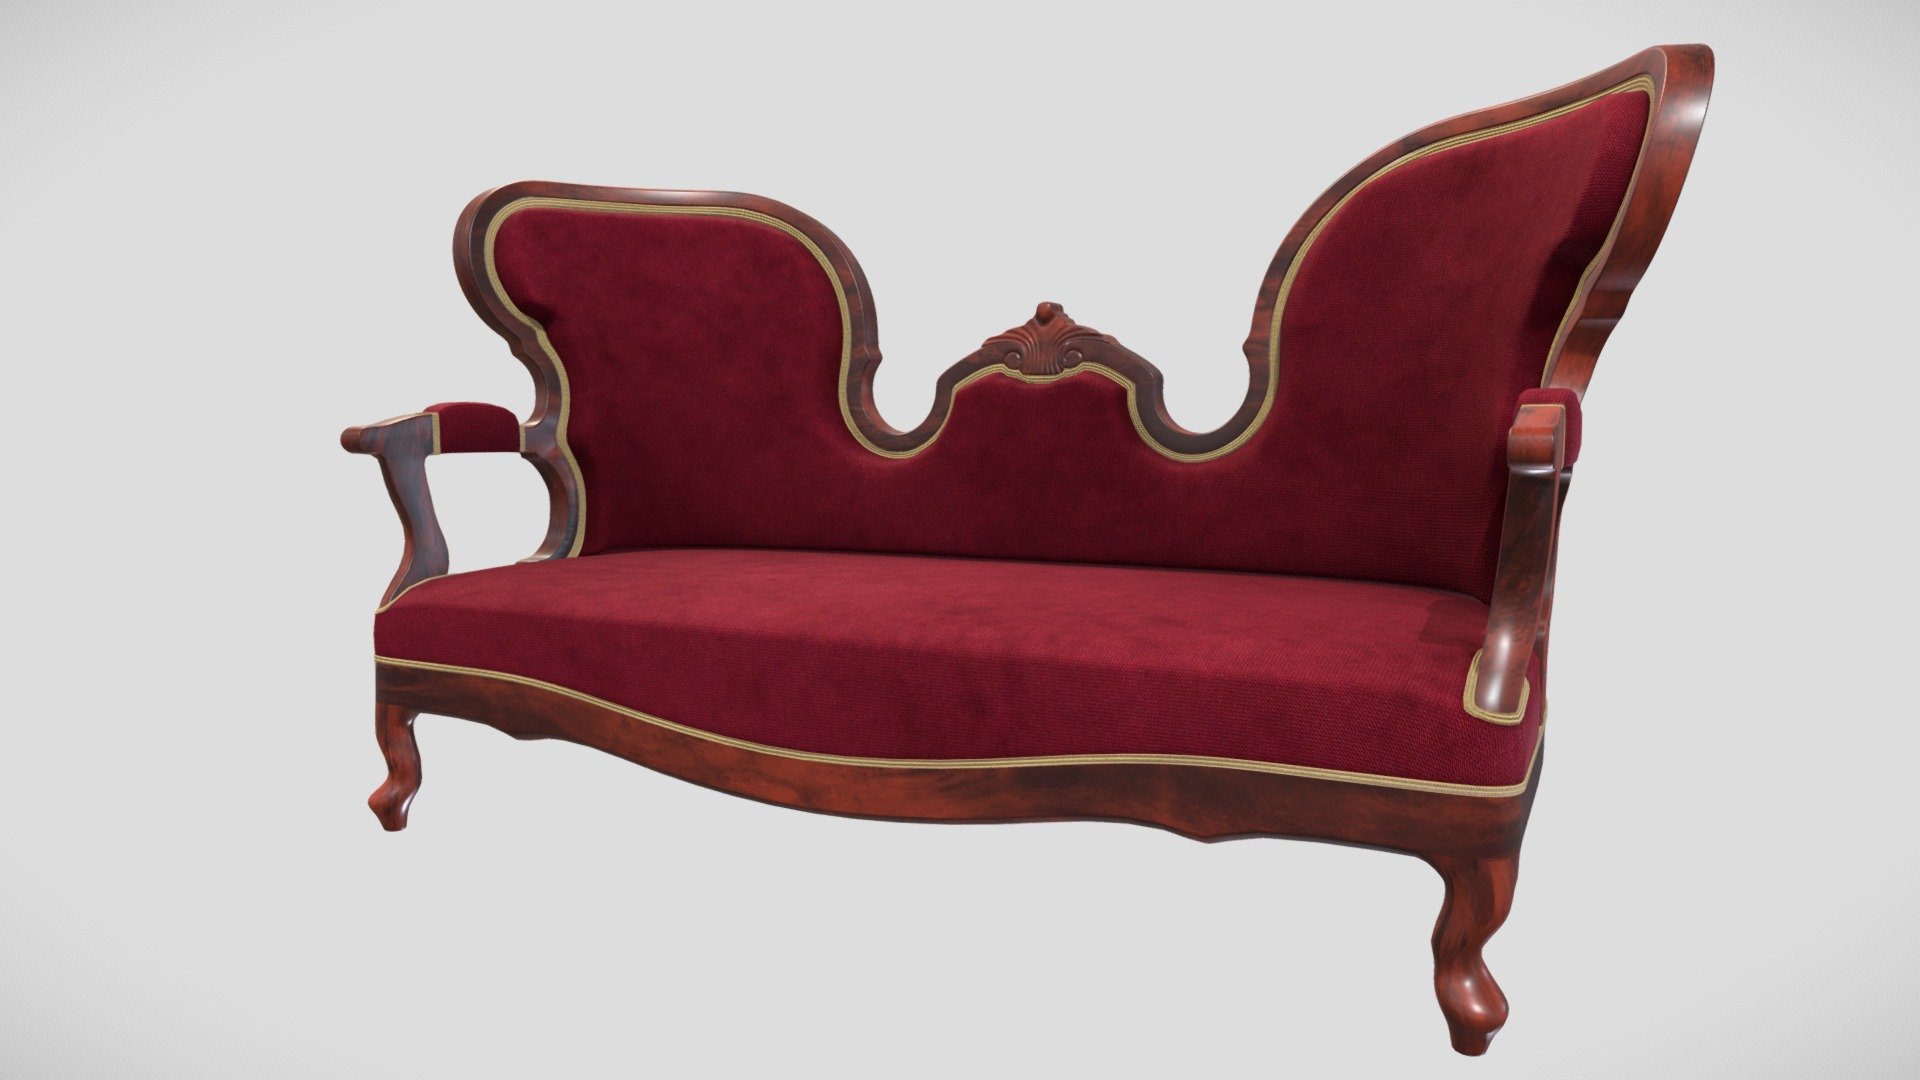 Gothic sofa for the living room with decent decorations. As a material, we chose dark acacia wood to highlight the decorations and velvet on the seating area. The model fits perfectly into any living room of the late 19th century. 

All models have a LOD and their own collider for easy use as game props. Packed Ambient oclusion (R), roughness (G) and metalic (B) and Unreal engine 4 project are also included 3d model